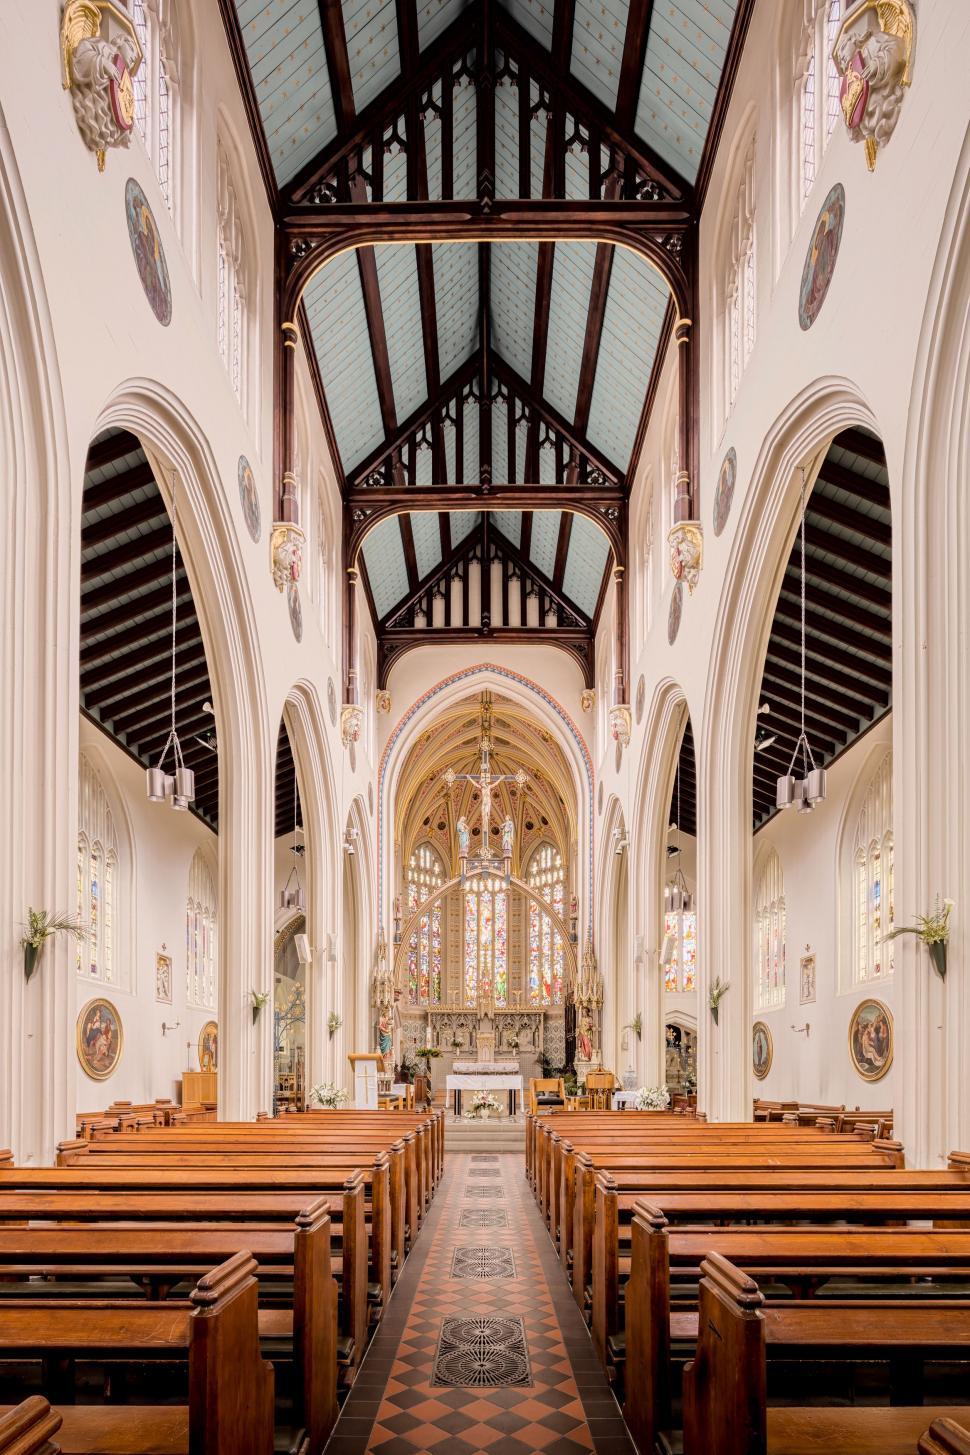 Free Image of Church Interior With Pews and Checkered Floor 